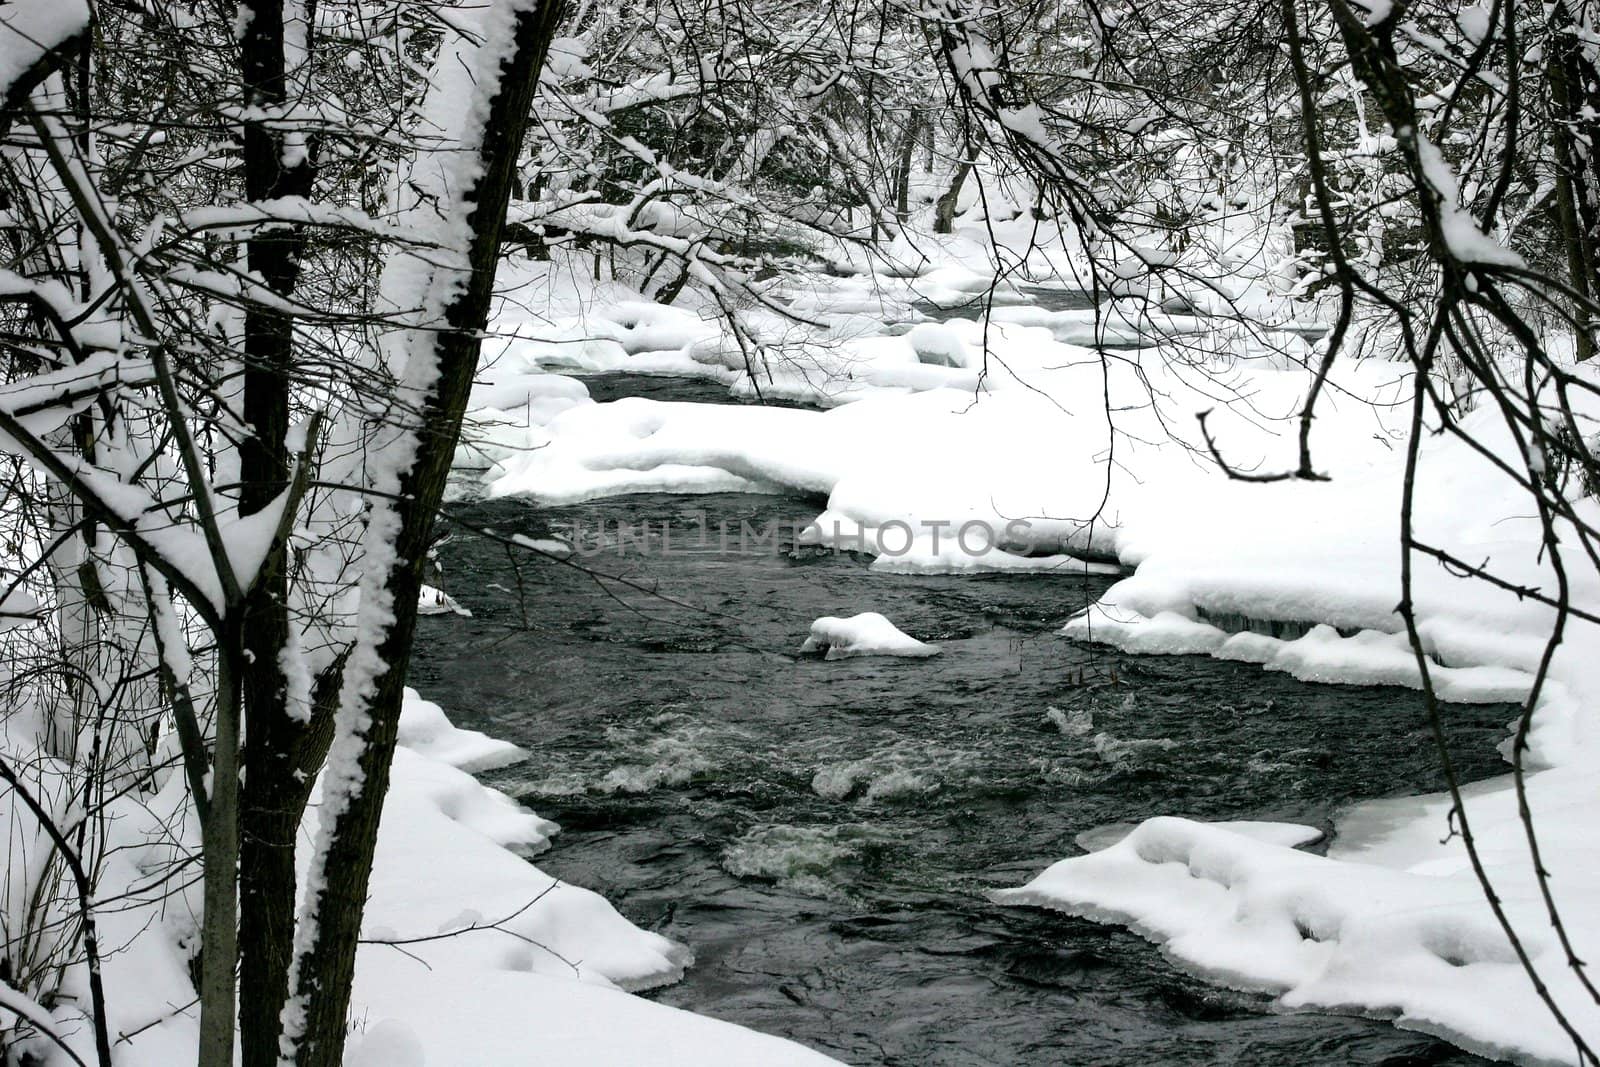 Small rapids on a river bend after a snow storm